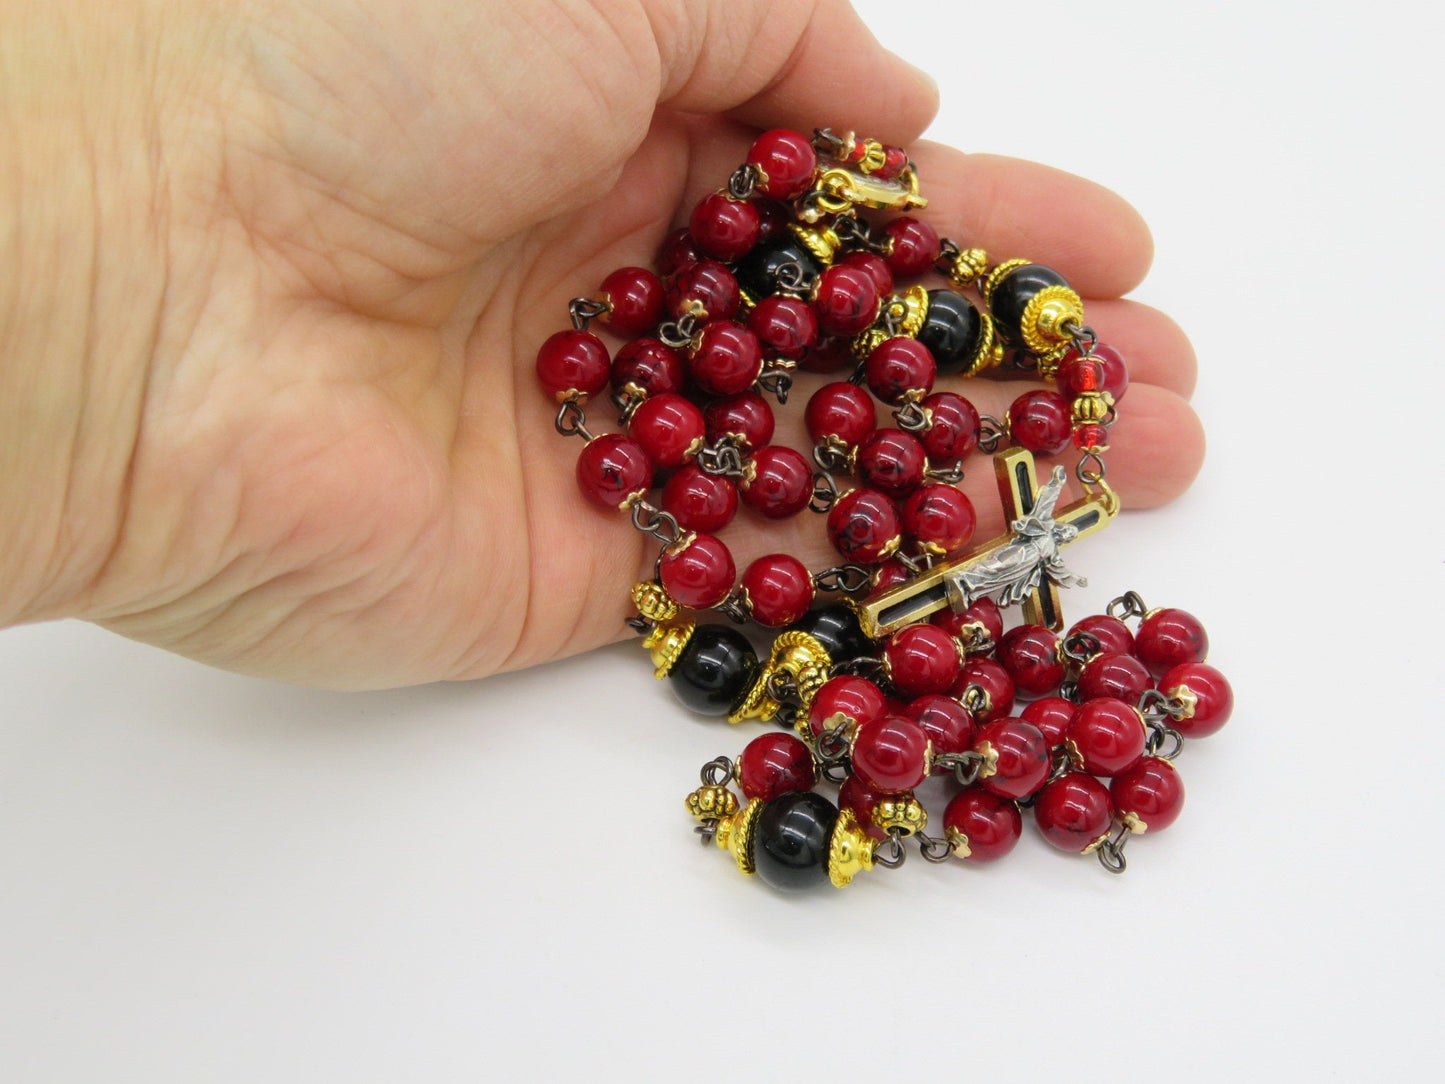 The Resurrection unique rosary beads with deep red and black glass beads, gold and black enamel crucifix and centre medal.